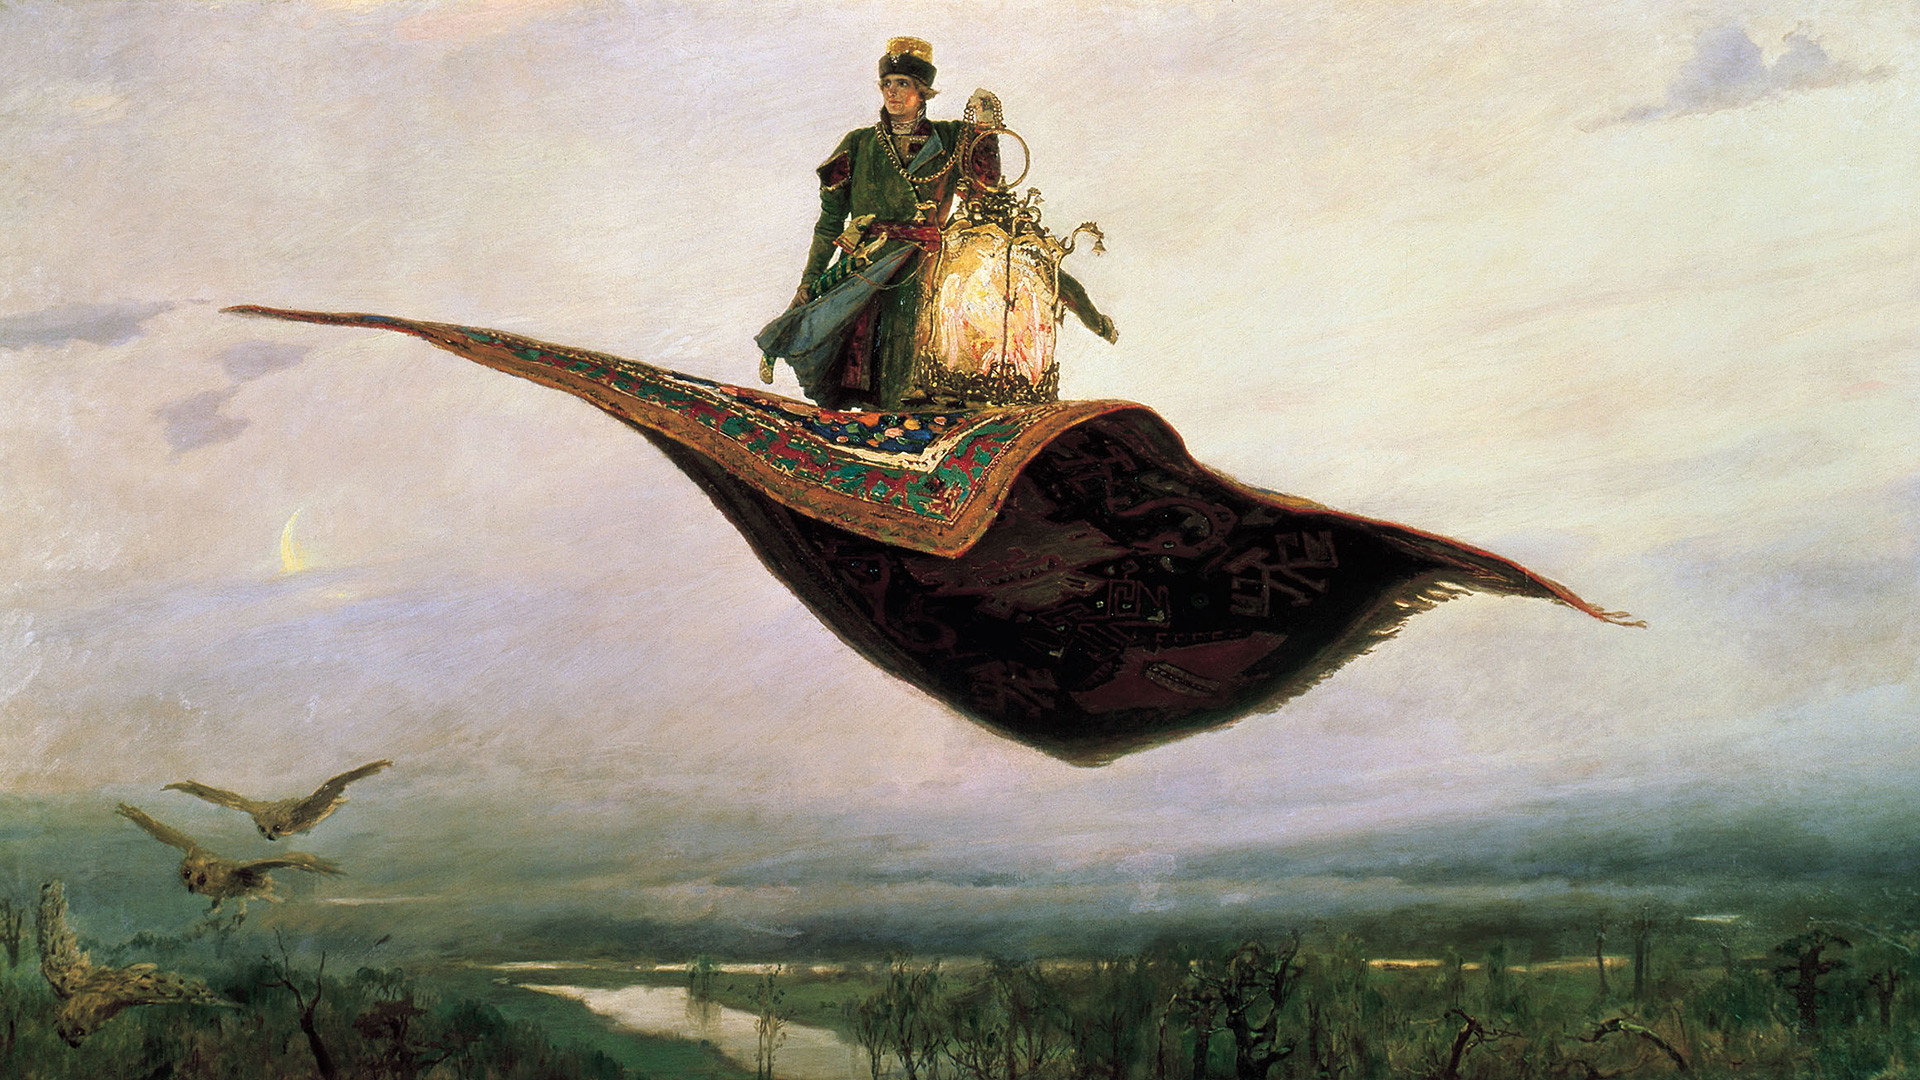 Anyone who has seen Aladdin knows what a magic carpet looks like. A prototype made in Russia is similar, but the pattern might differ.